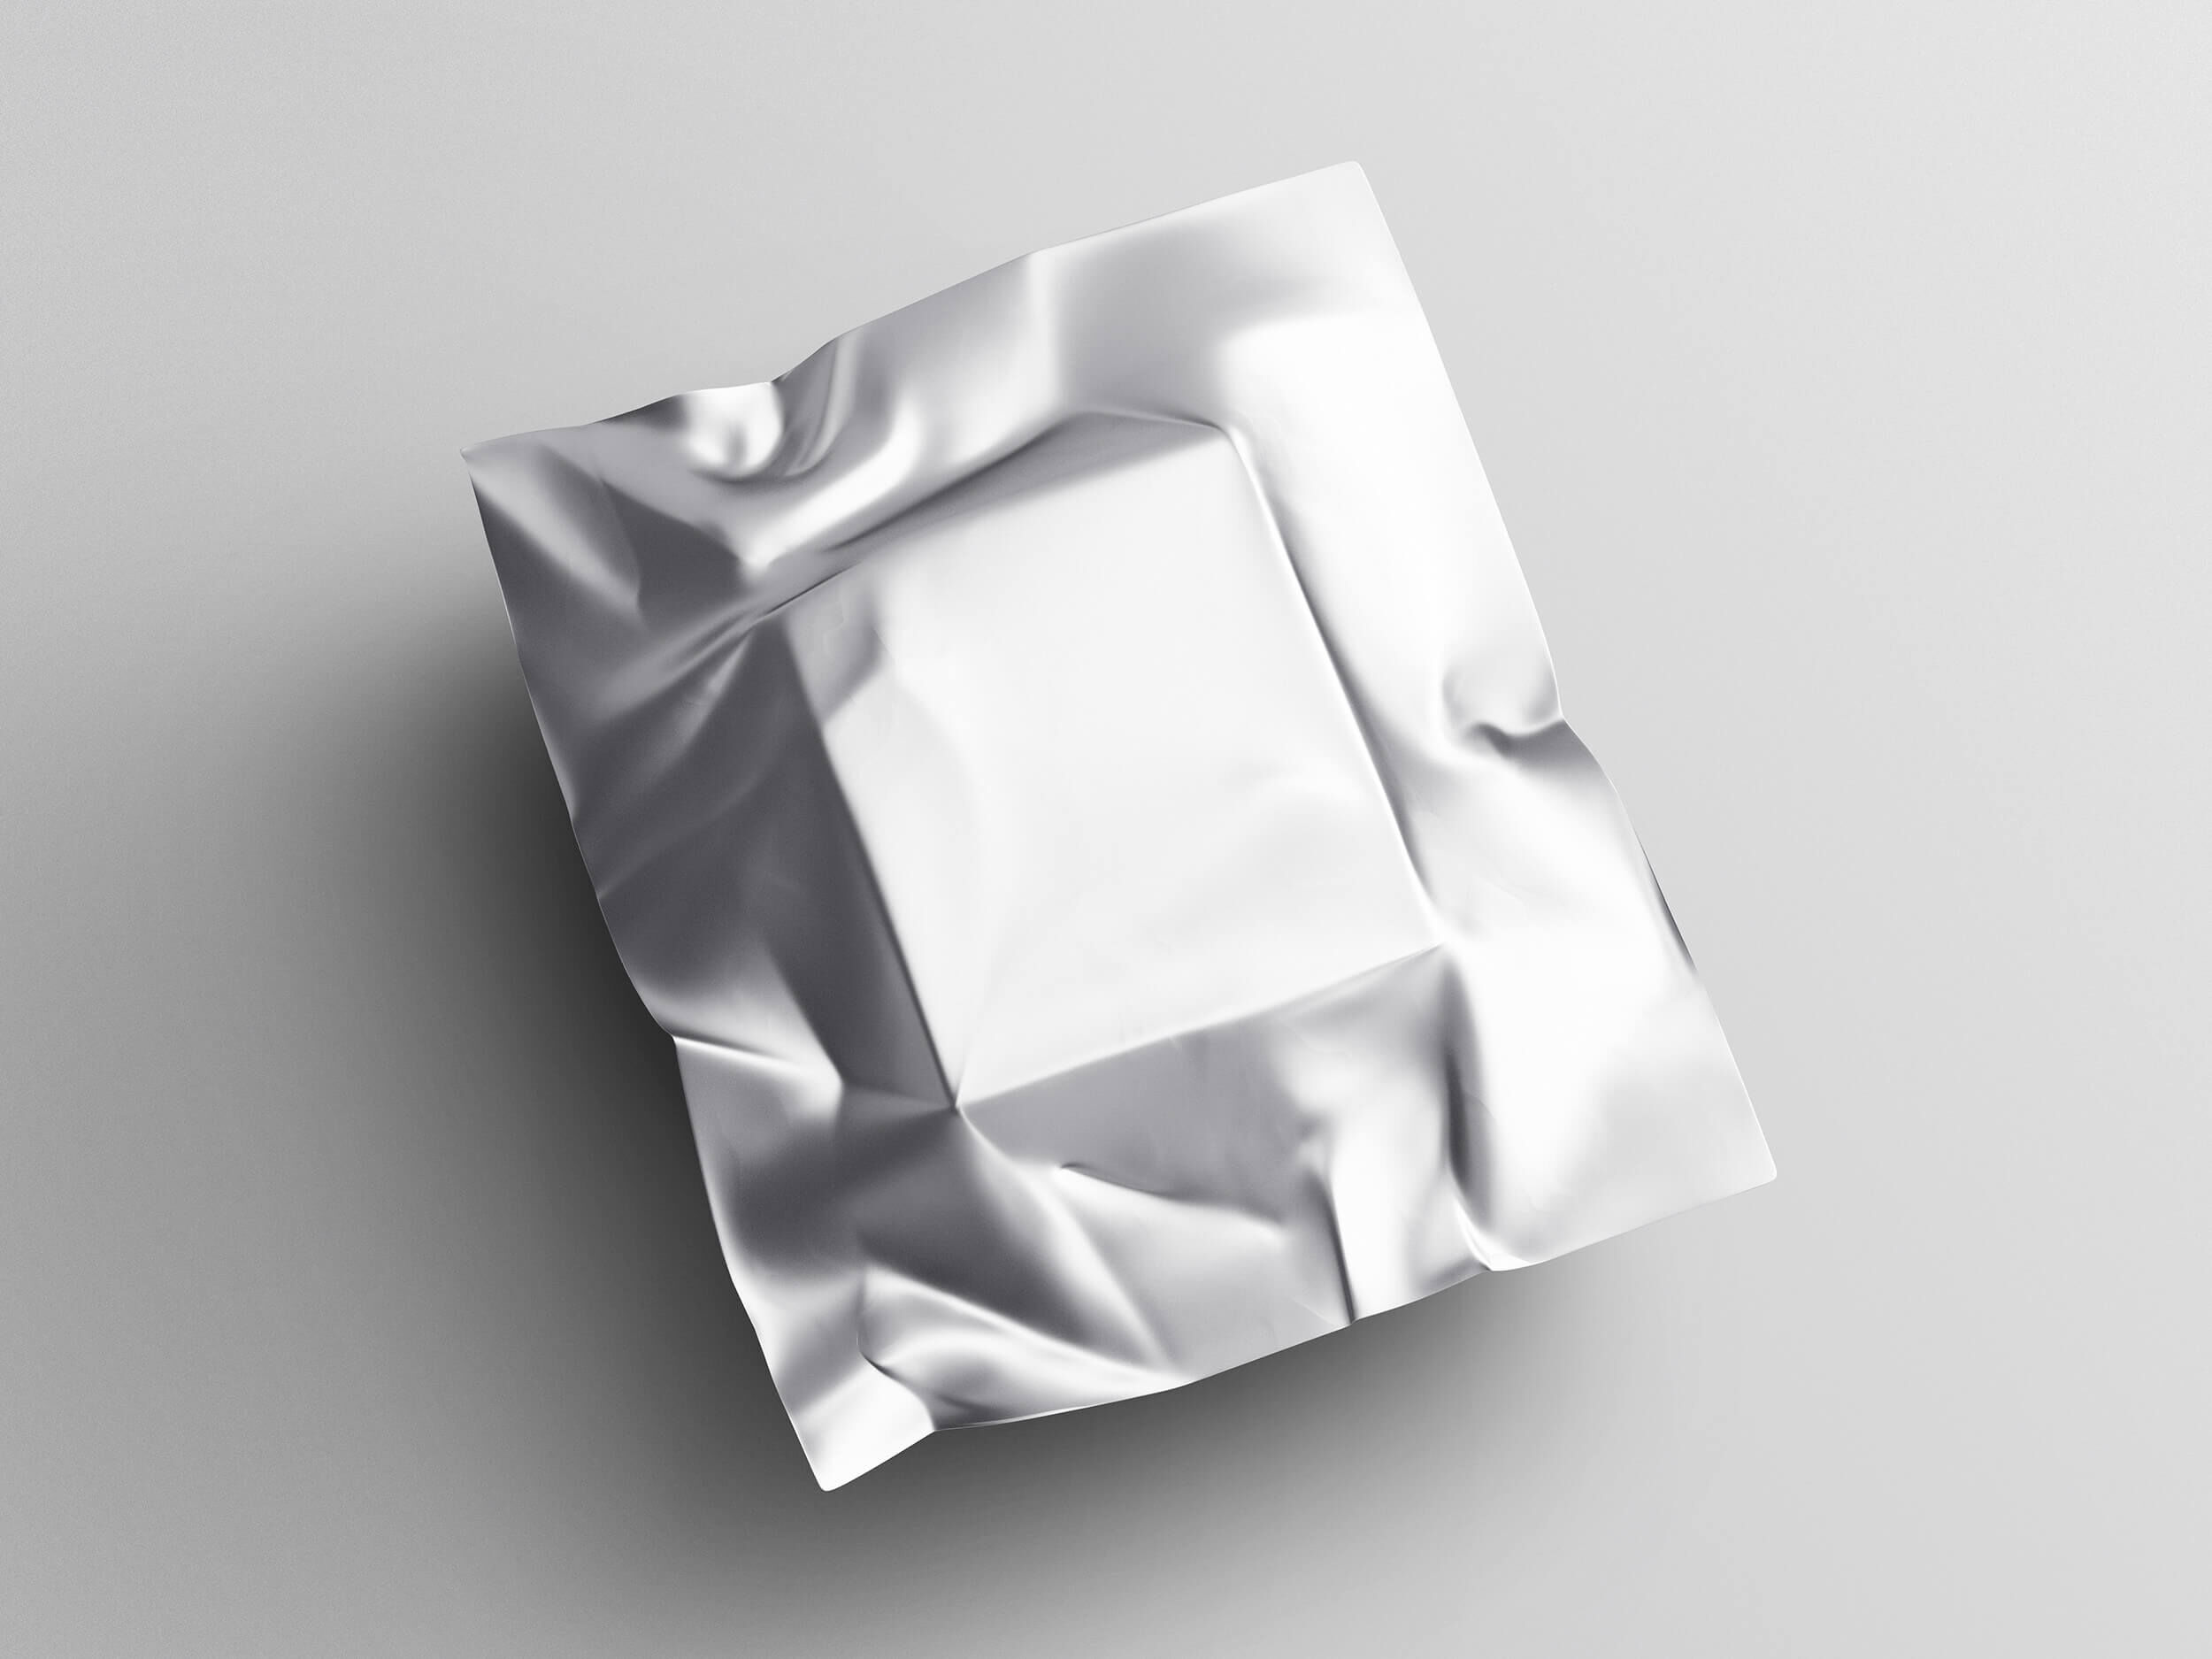 Metallic Paper Package Covering Squared Object Mockup FREE PSD